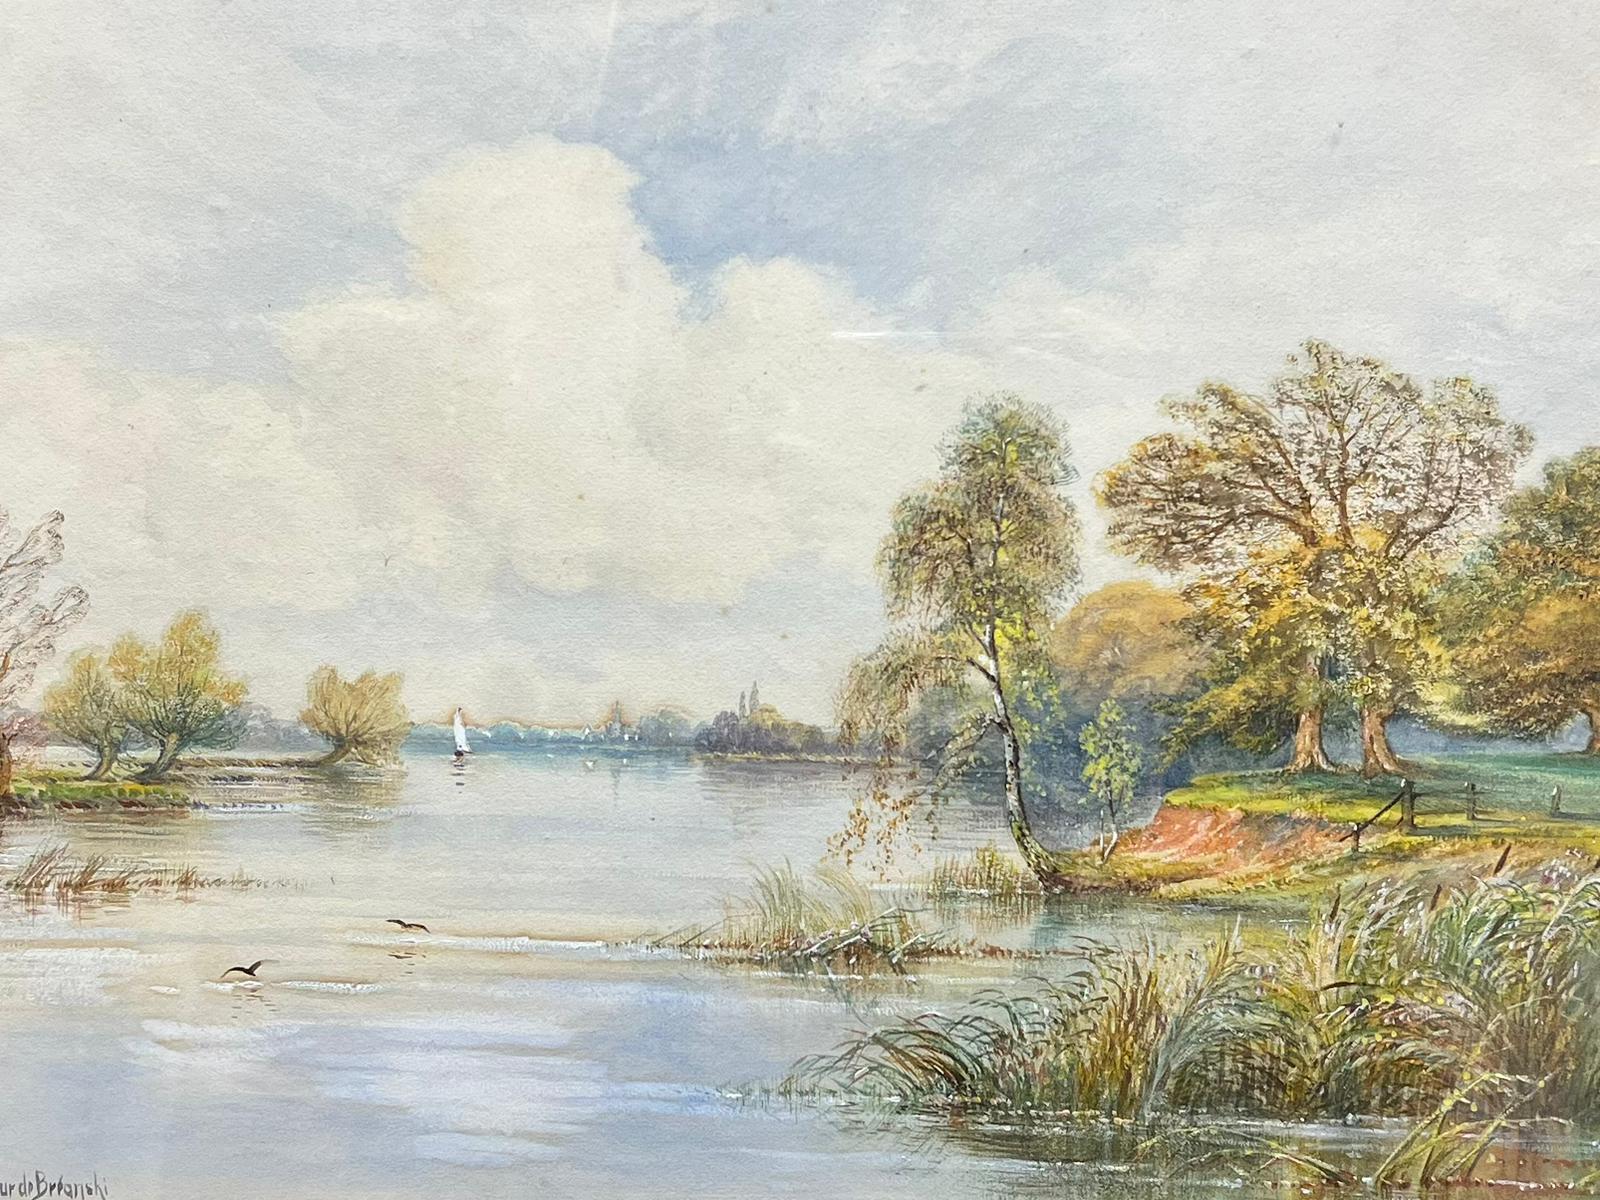 A Sunny Day On The Thames River Landscape, Antique British Painting